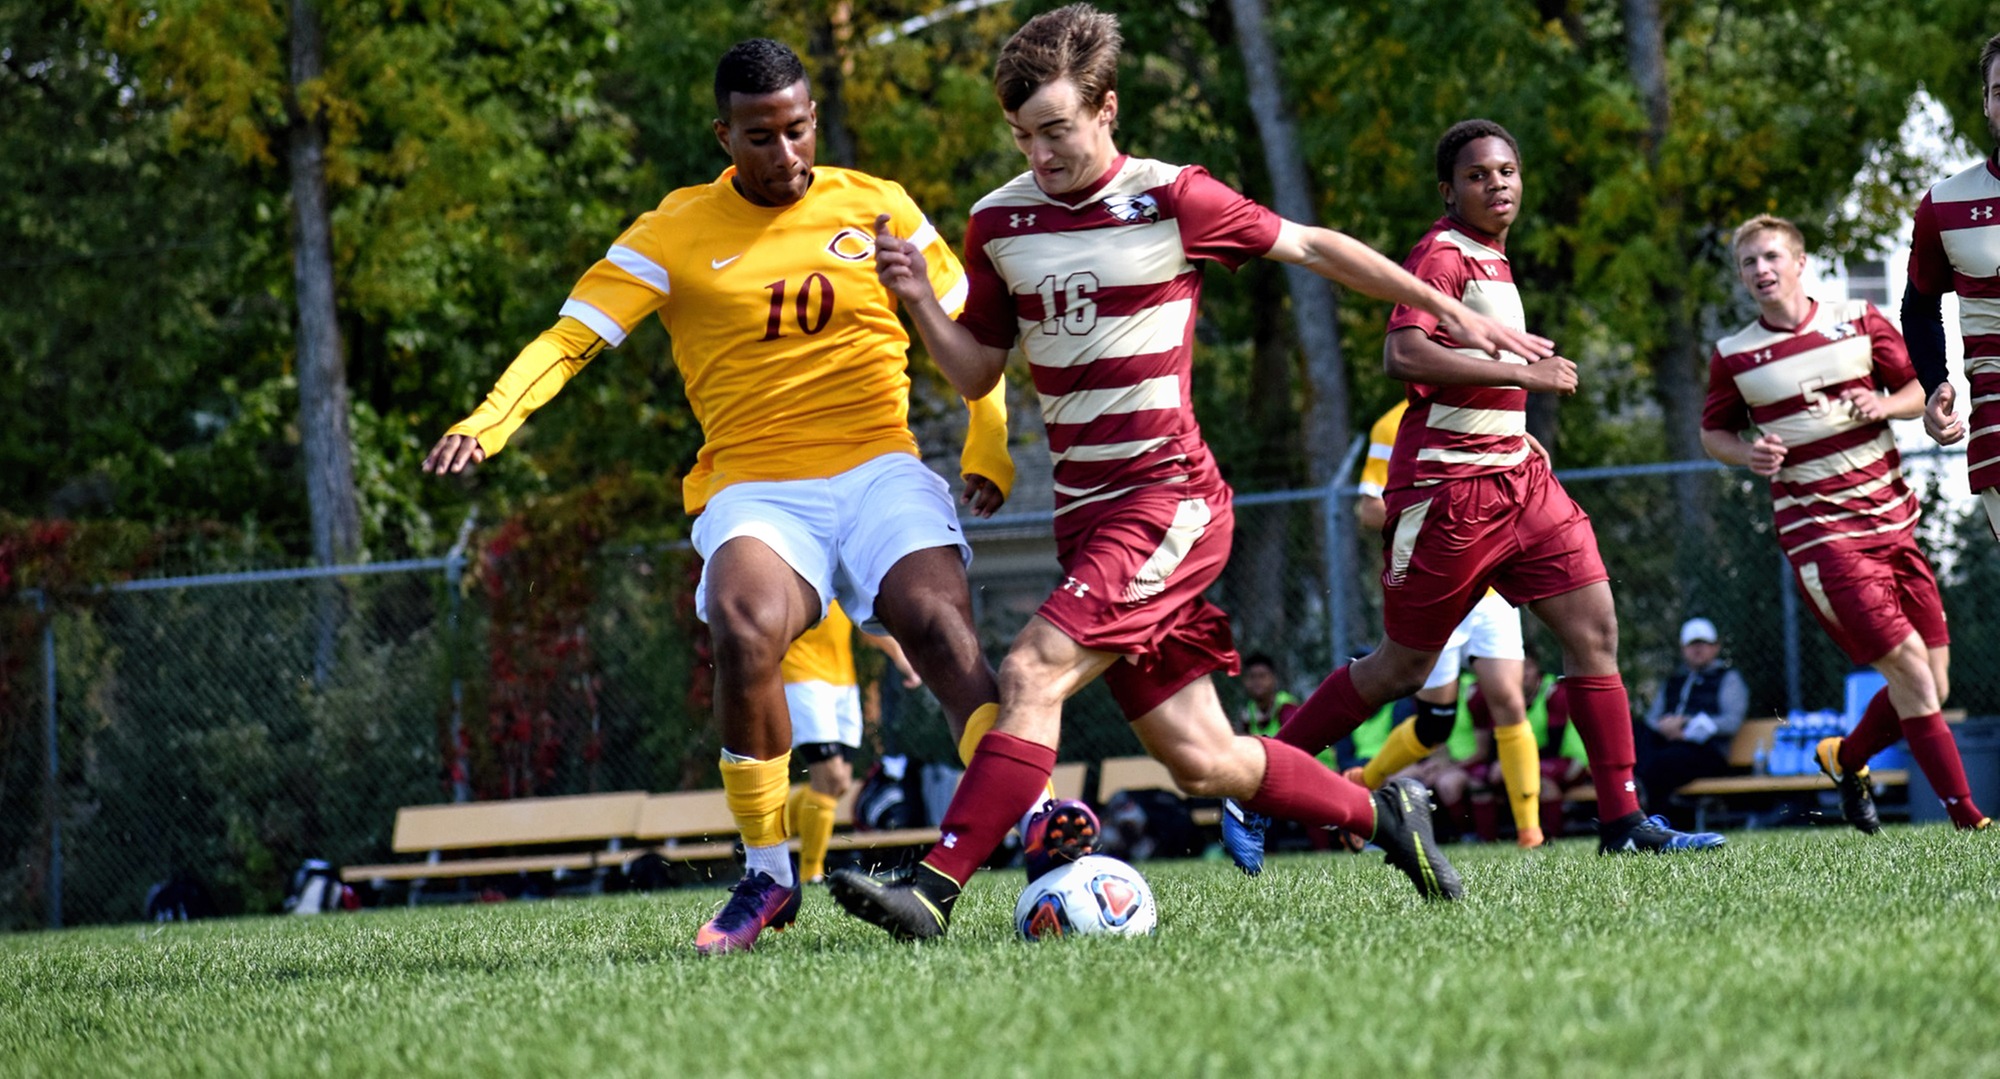 Junior Pierre Freitas-Elysee battles for the ball in the Cobbers' win over Coe. Freitas-Elysee assisted on the game-winning goal in double overtime. (Photo courtesy of Maddy Reed)